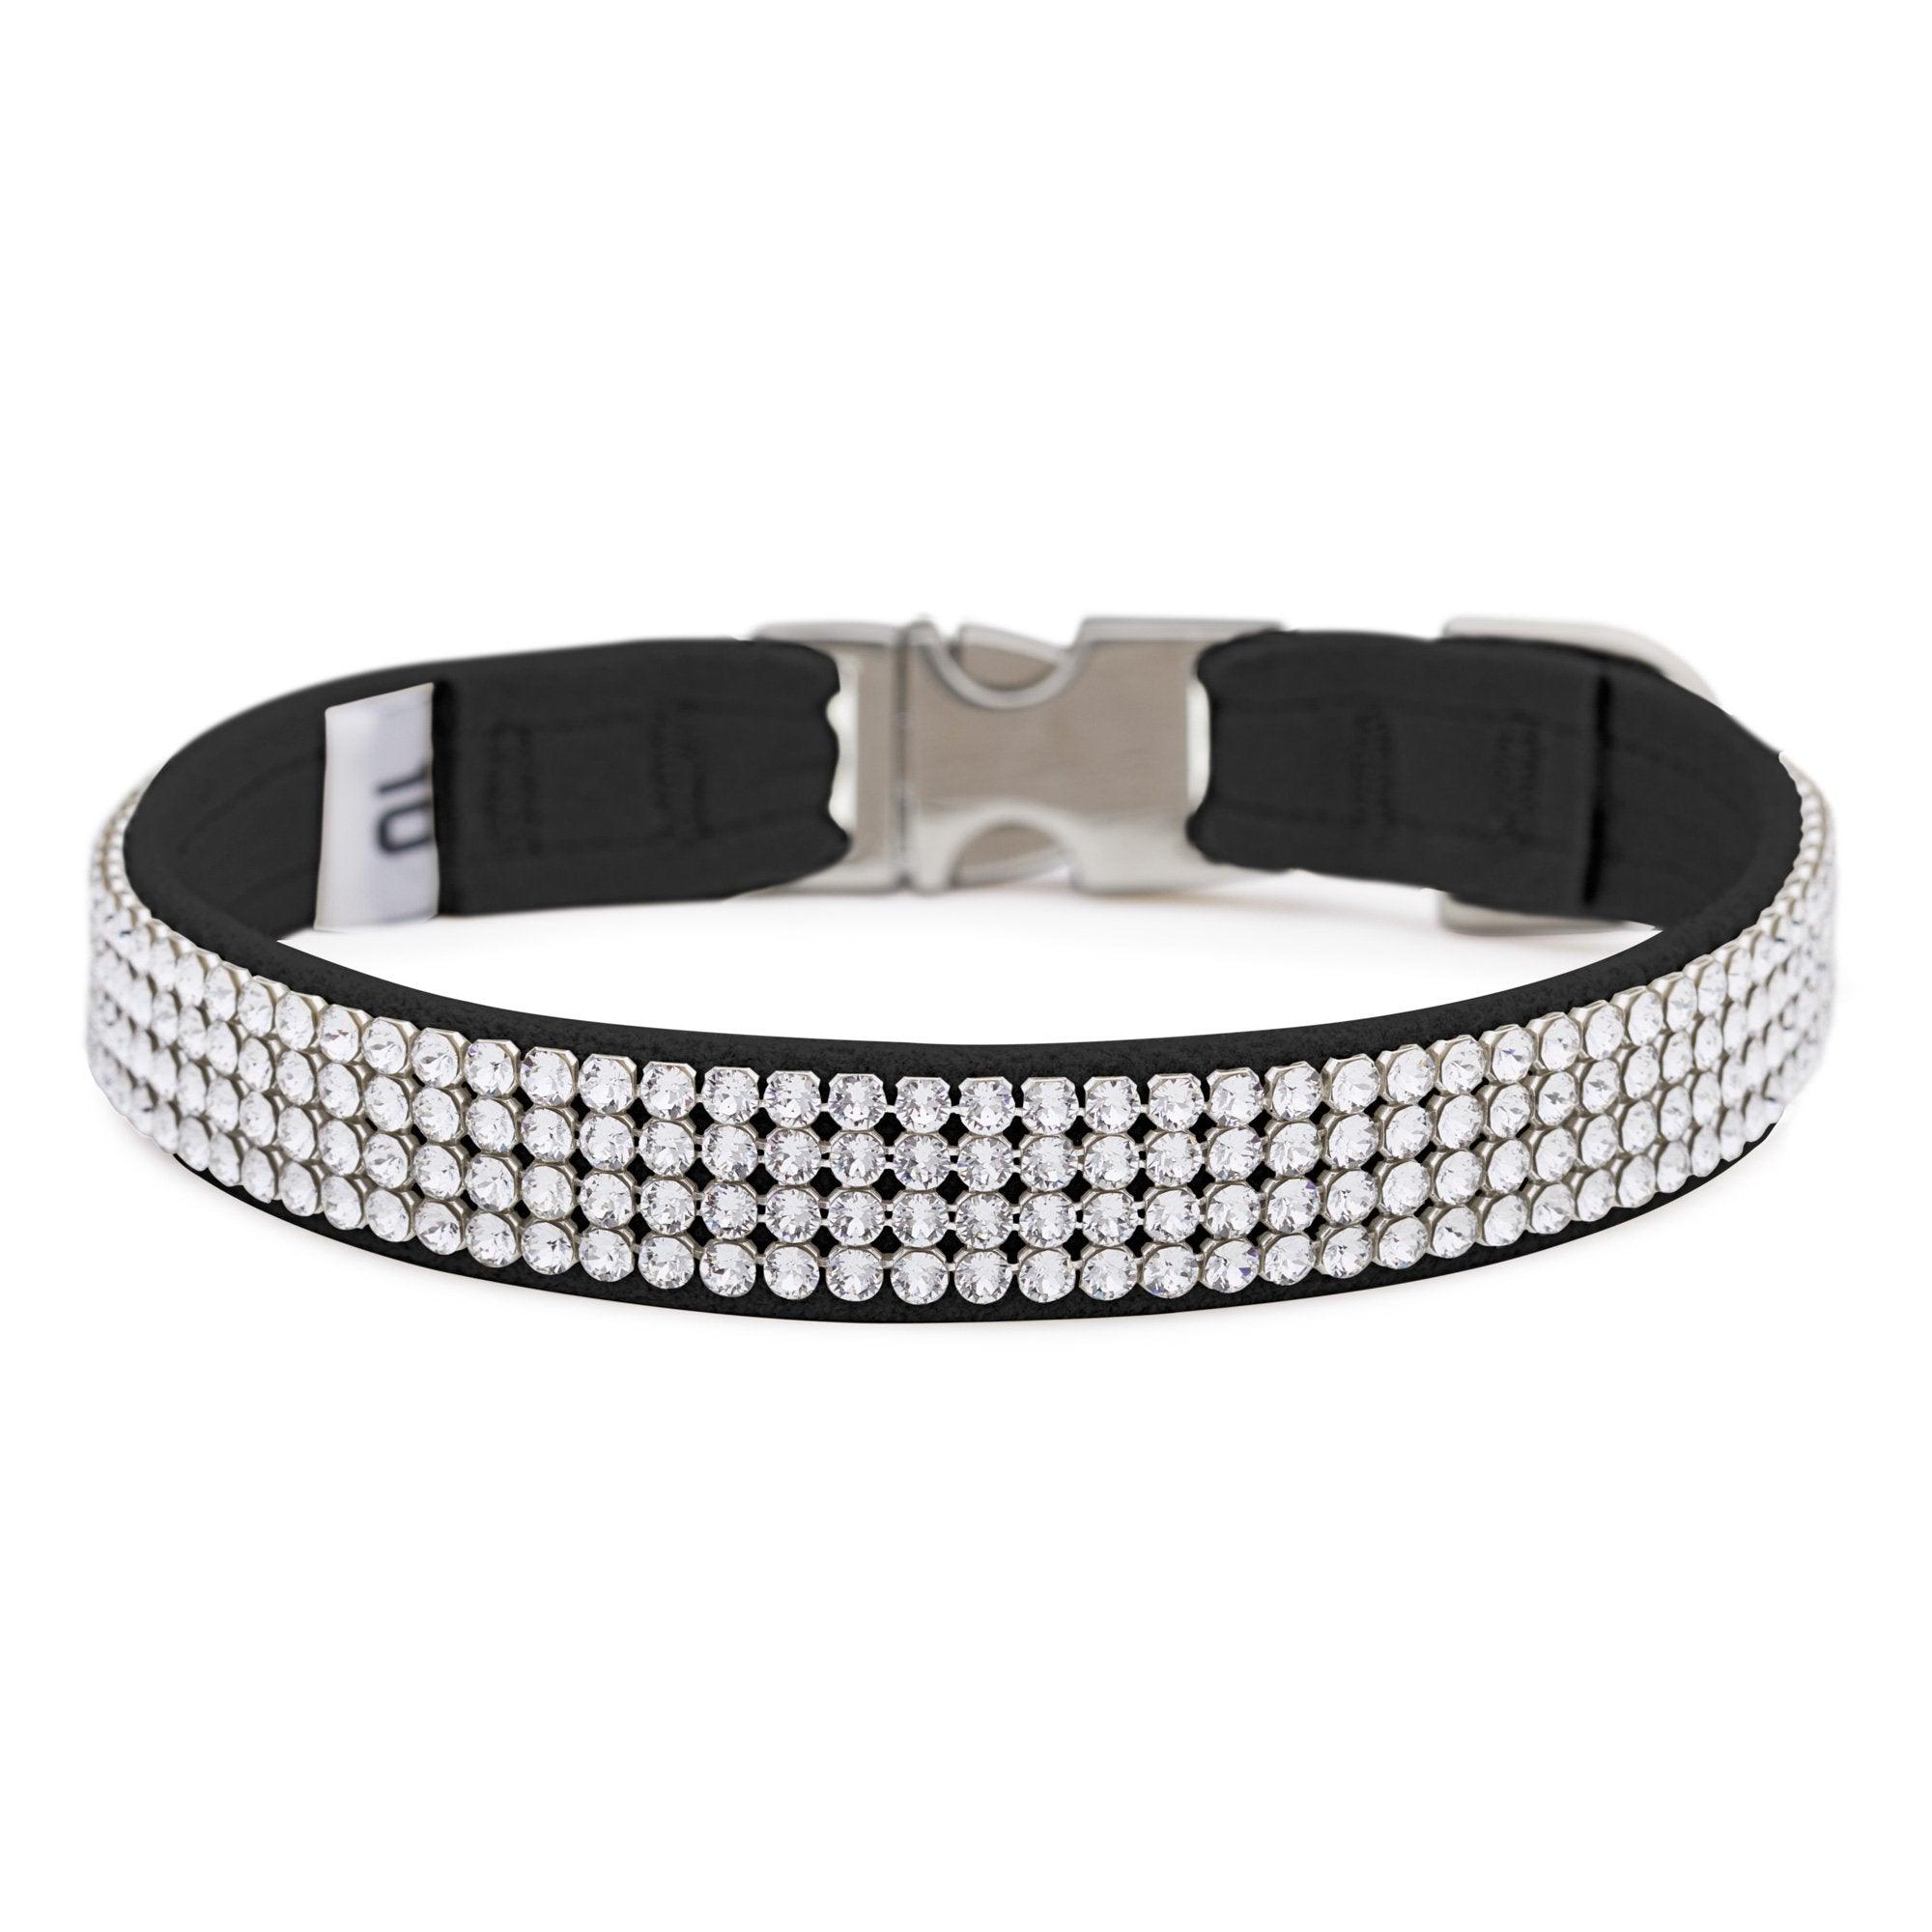 Black 4 Row Giltmore Perfect Fit Collar - Rocky & Maggie's Pet Boutique and Salon